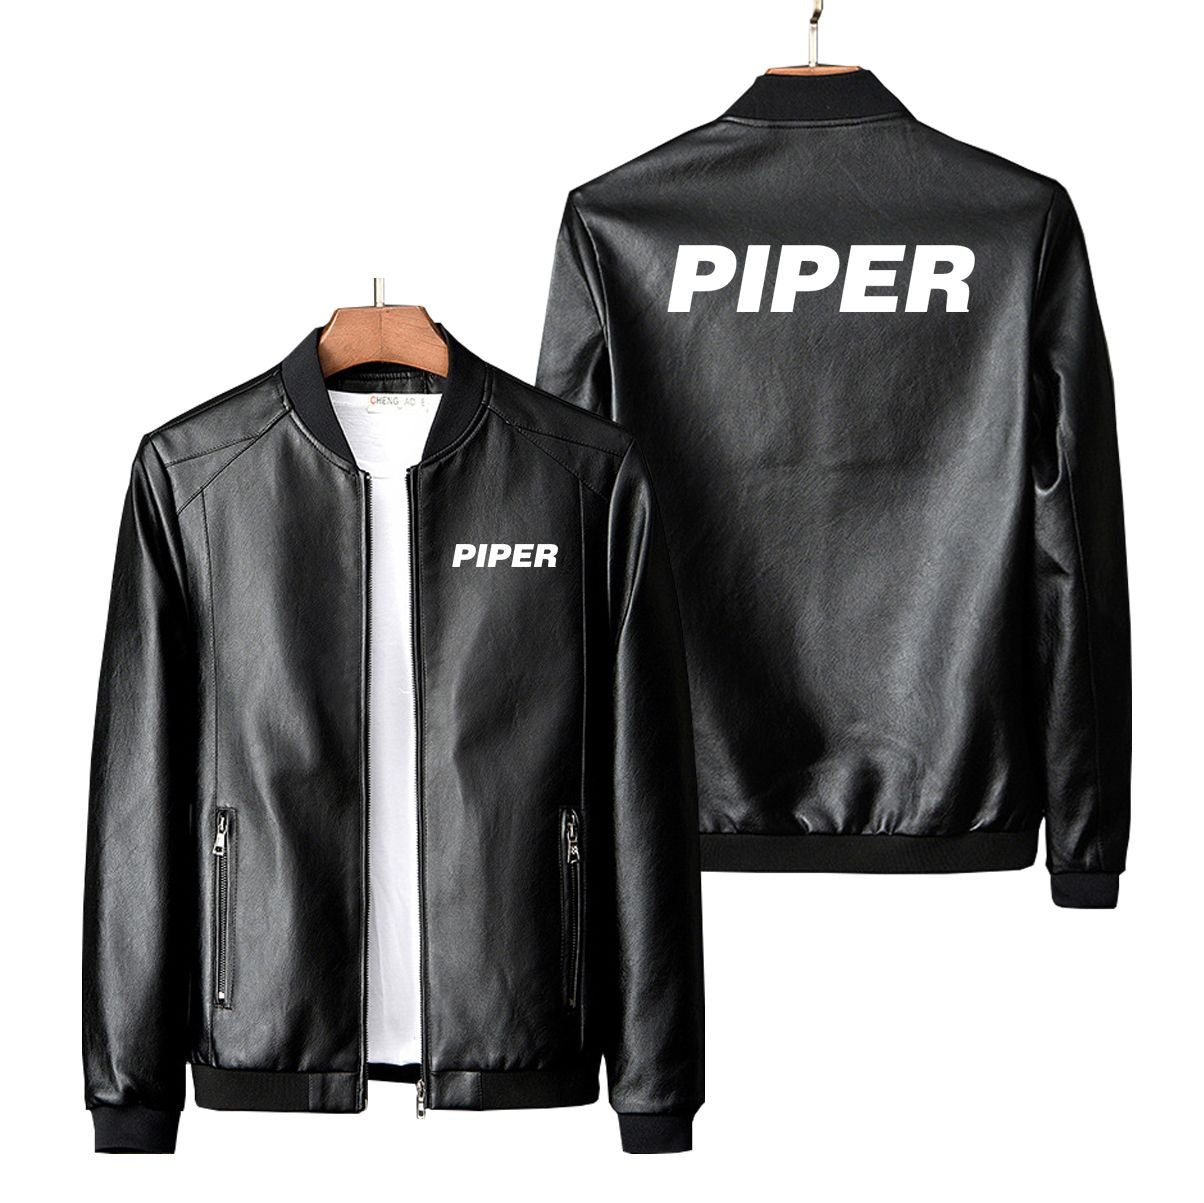 Piper & Text Designed PU Leather Jackets